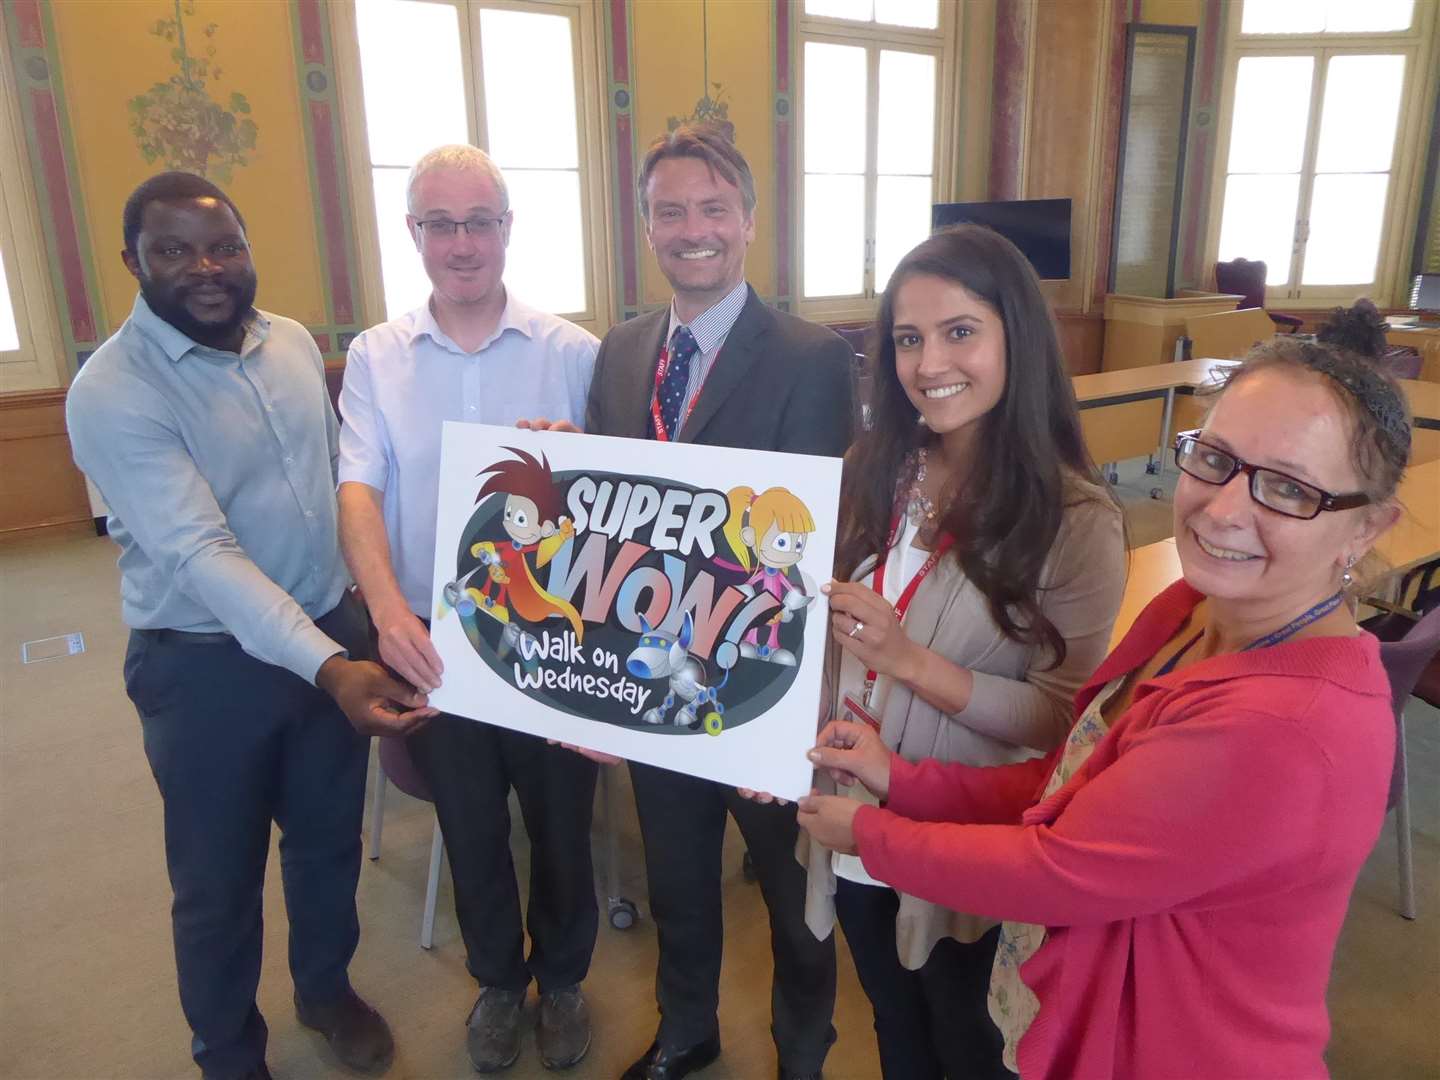 Fipa Nindi, Duncan Haynes and Sarah Jane Edwards-Bonner (right) of Mid-Kent Environmental Health team join Dan Smith (centre) and Miriam Lebrette of St John’s CEP School, Maidstone to launch the county town’s green campaign. (2123403)